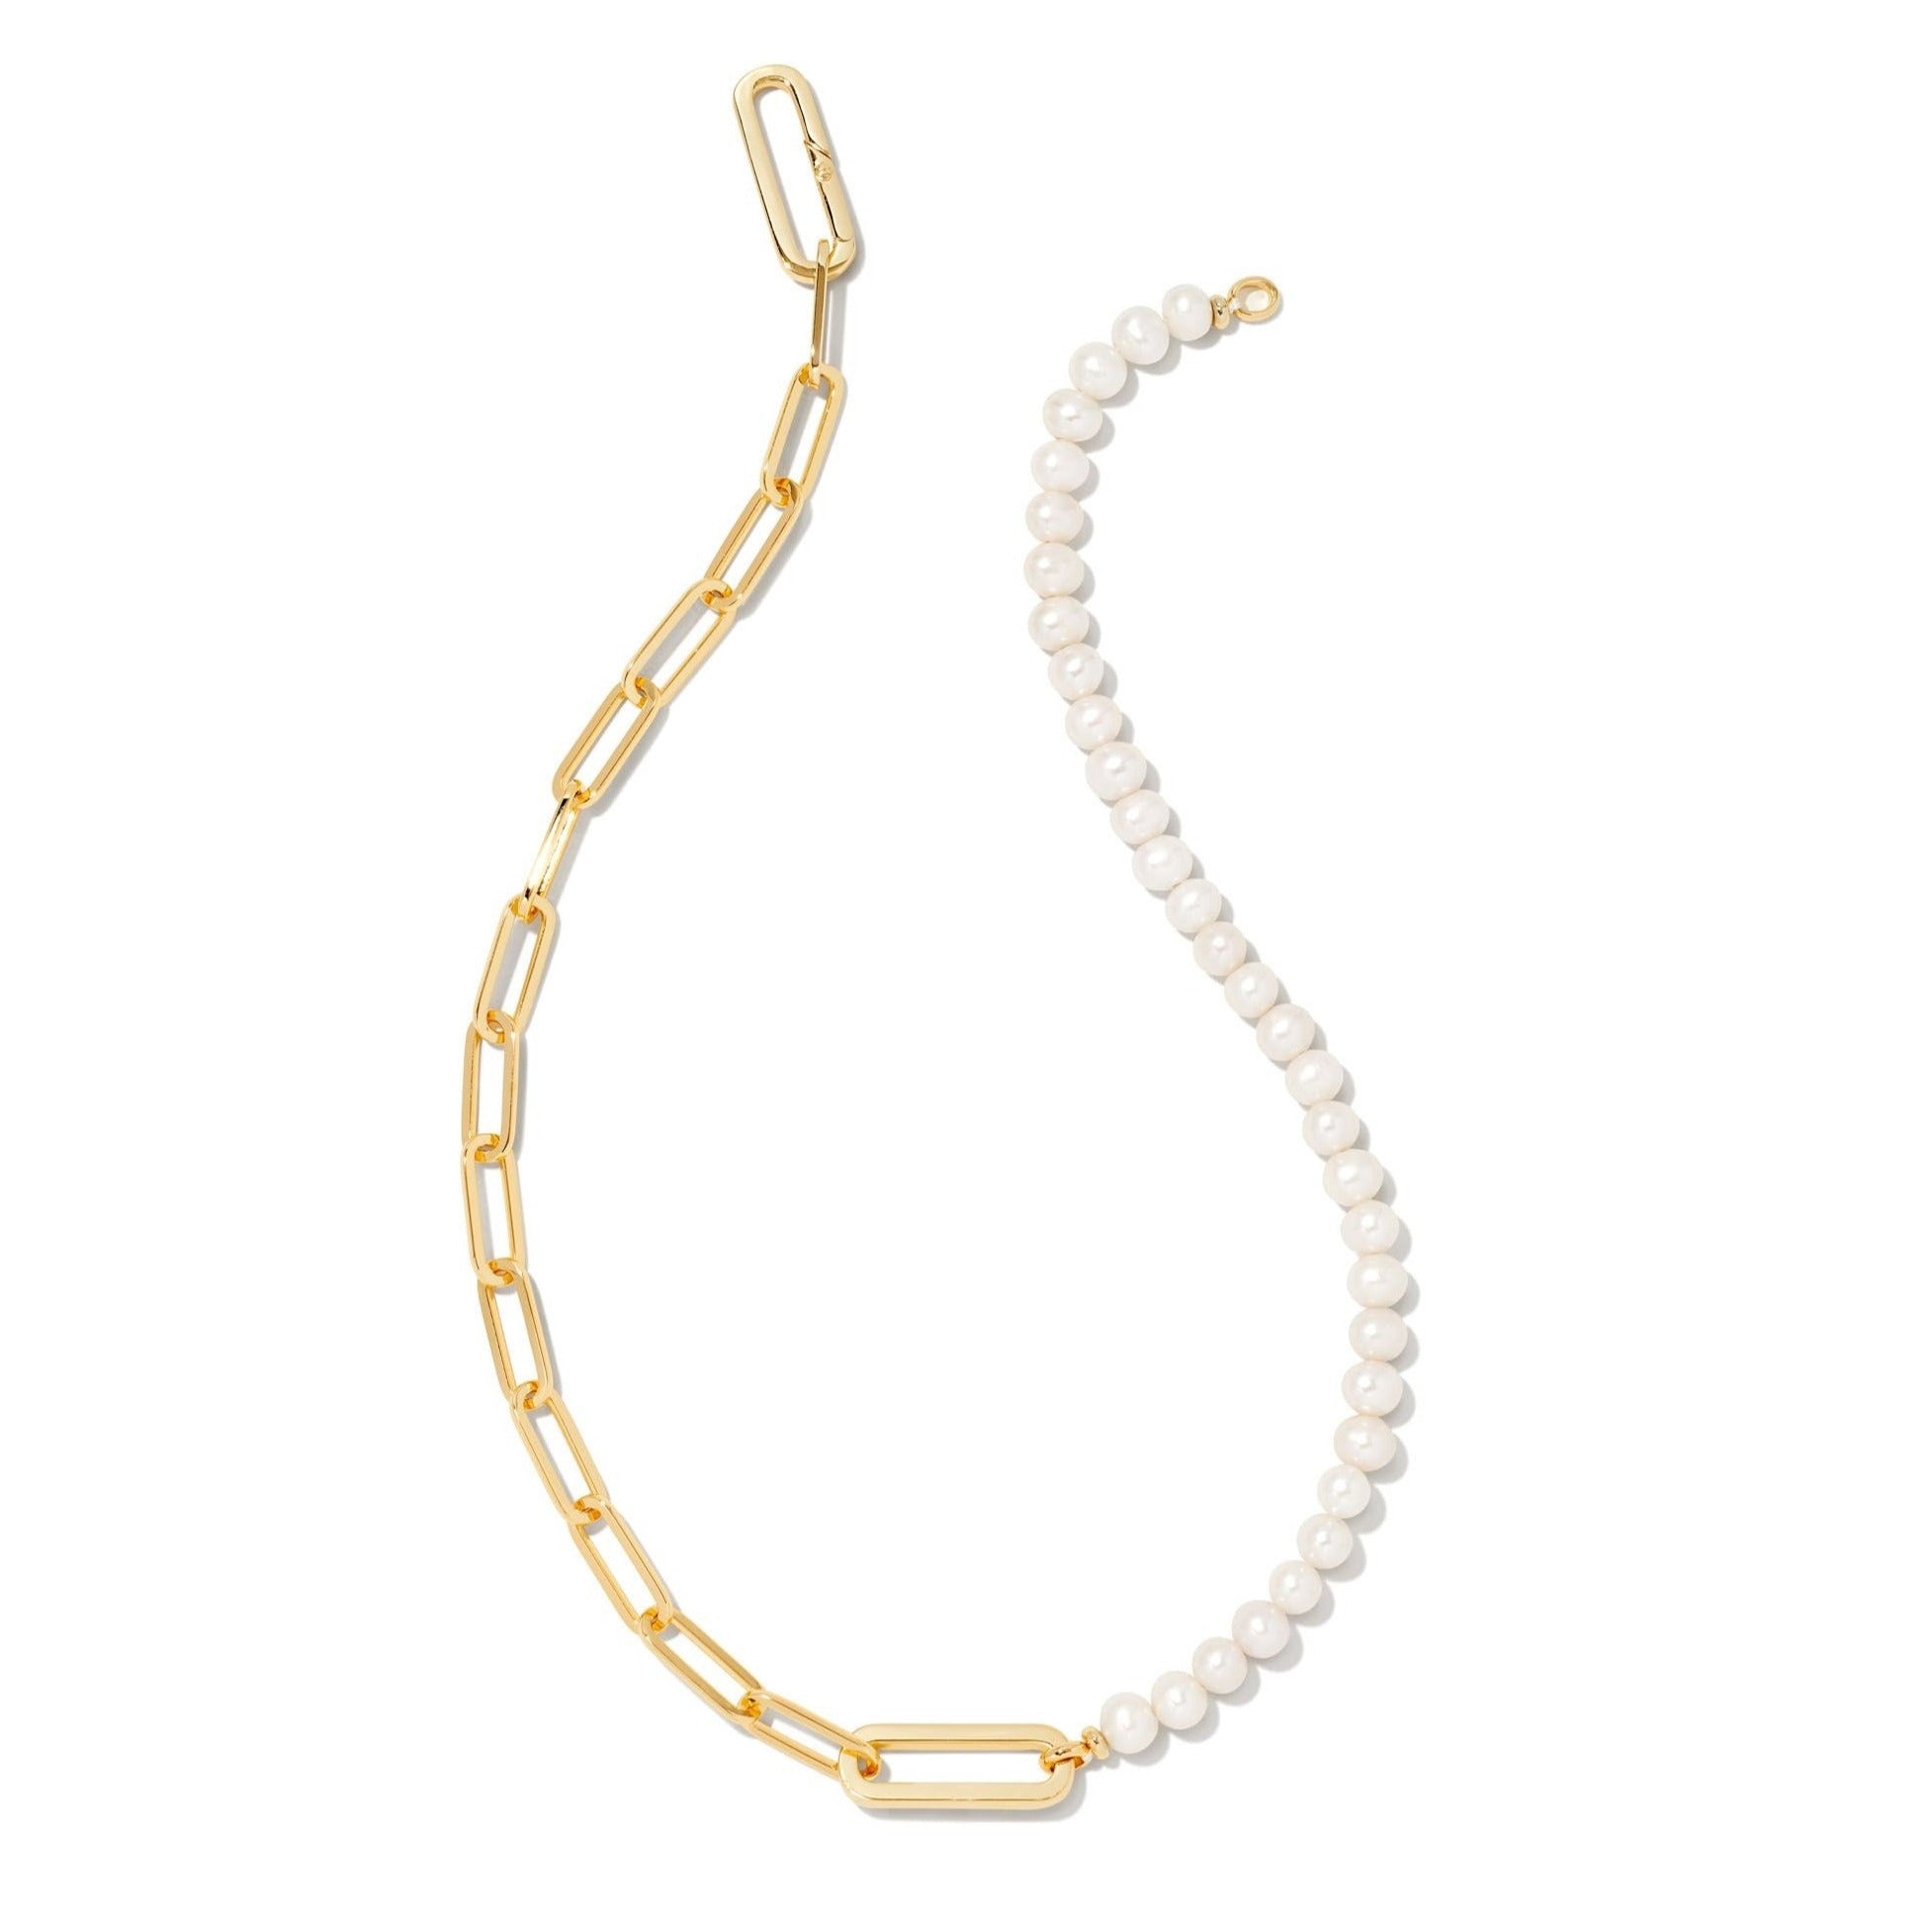 Kendra Scott | Ashton Gold Half Chain White Pearl Necklace - Giddy Up Glamour Boutique